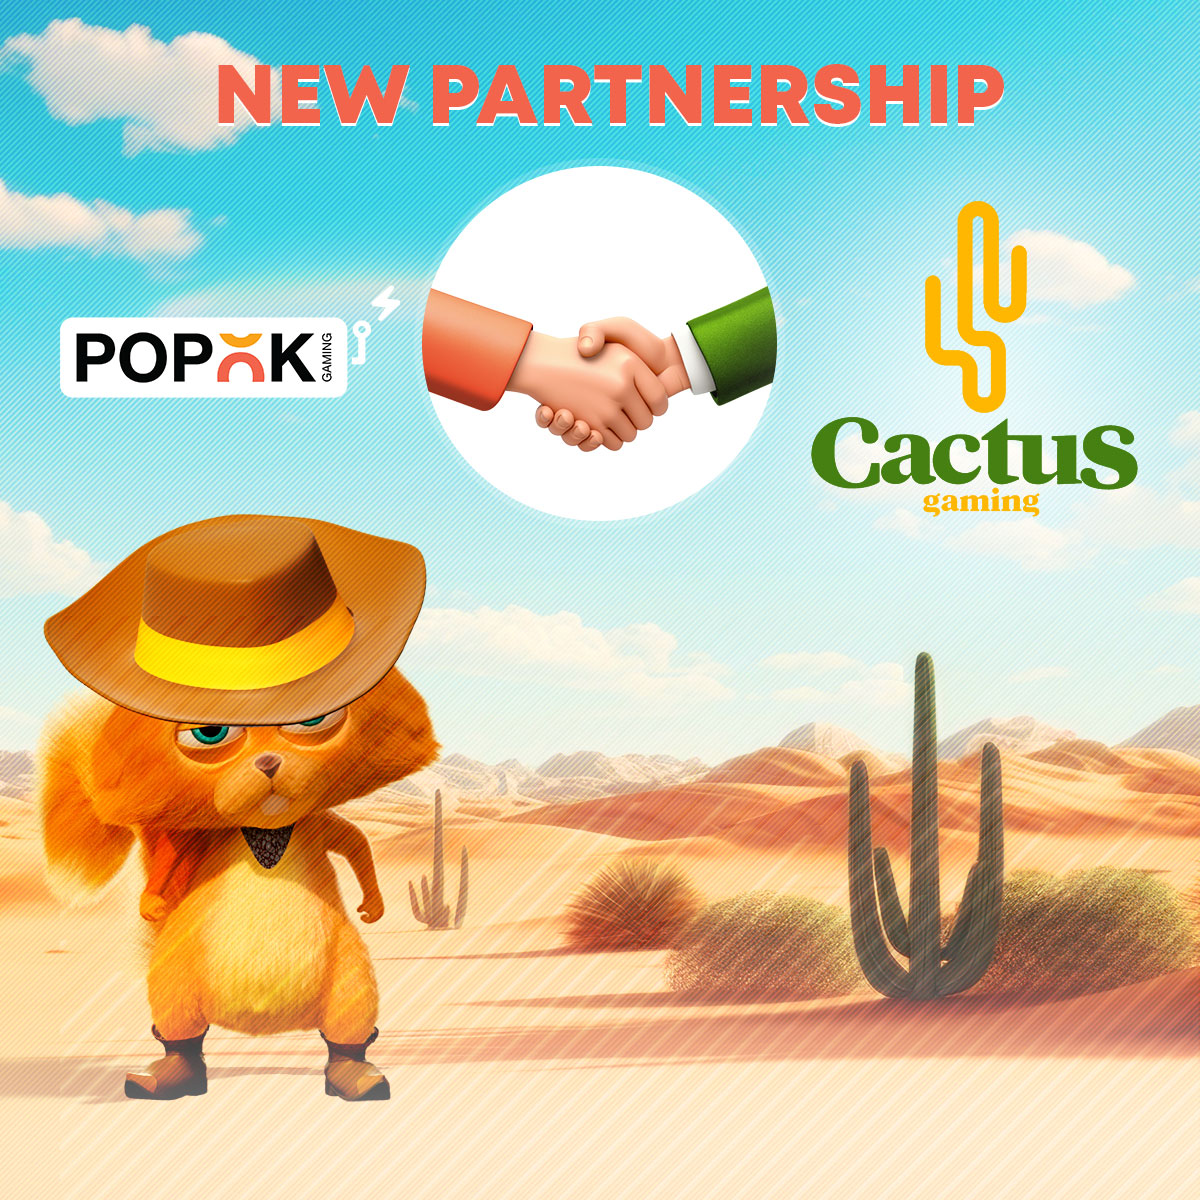 .@popok_gaming and Cactus Gaming announced their new partnership

Through this deal, both companies will create experiences that captivate audiences everywhere.

#PopOK #CactusGaming #NewPartnership

focusgn.com/popok-gaming-a…